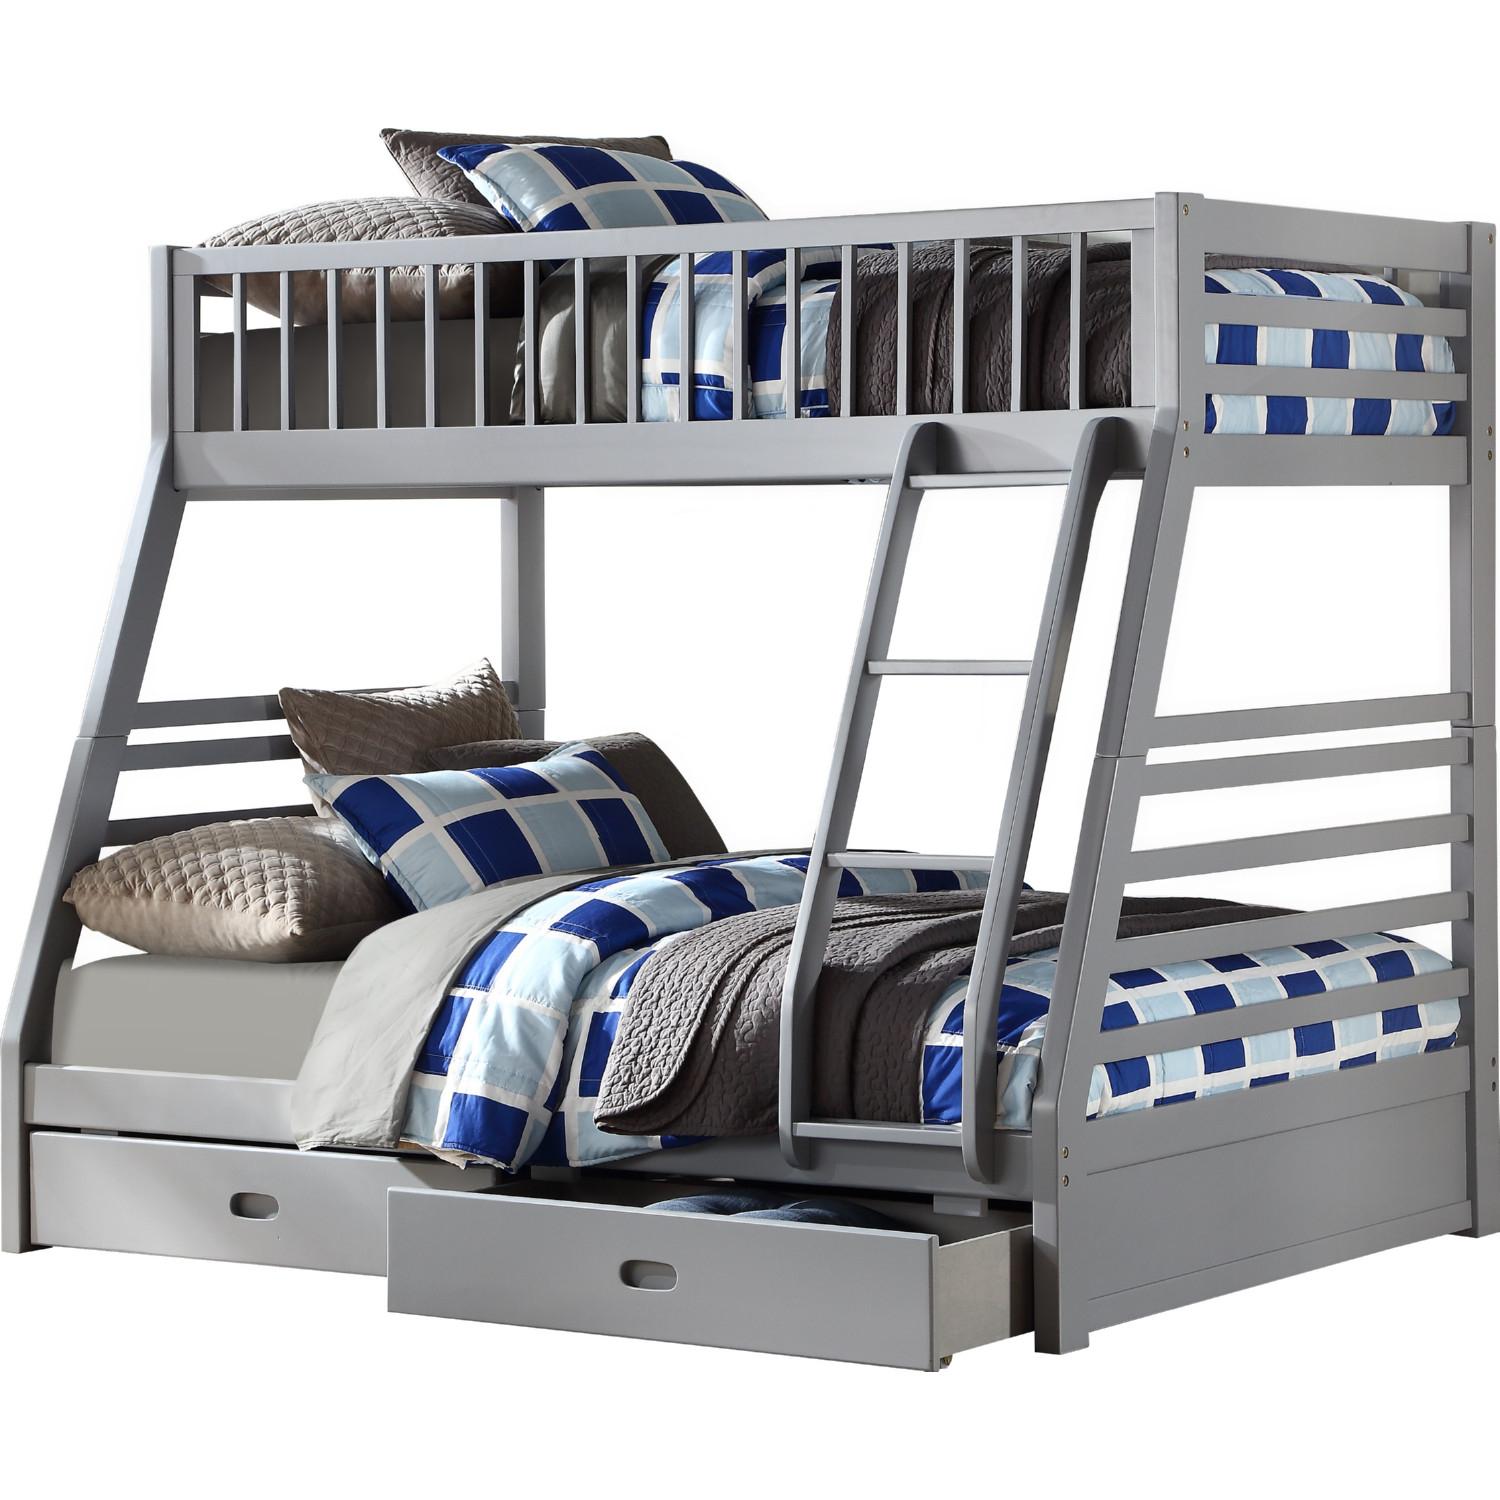 Transitional Twin/Full Bunk Bed Jason 37840 in Gray 